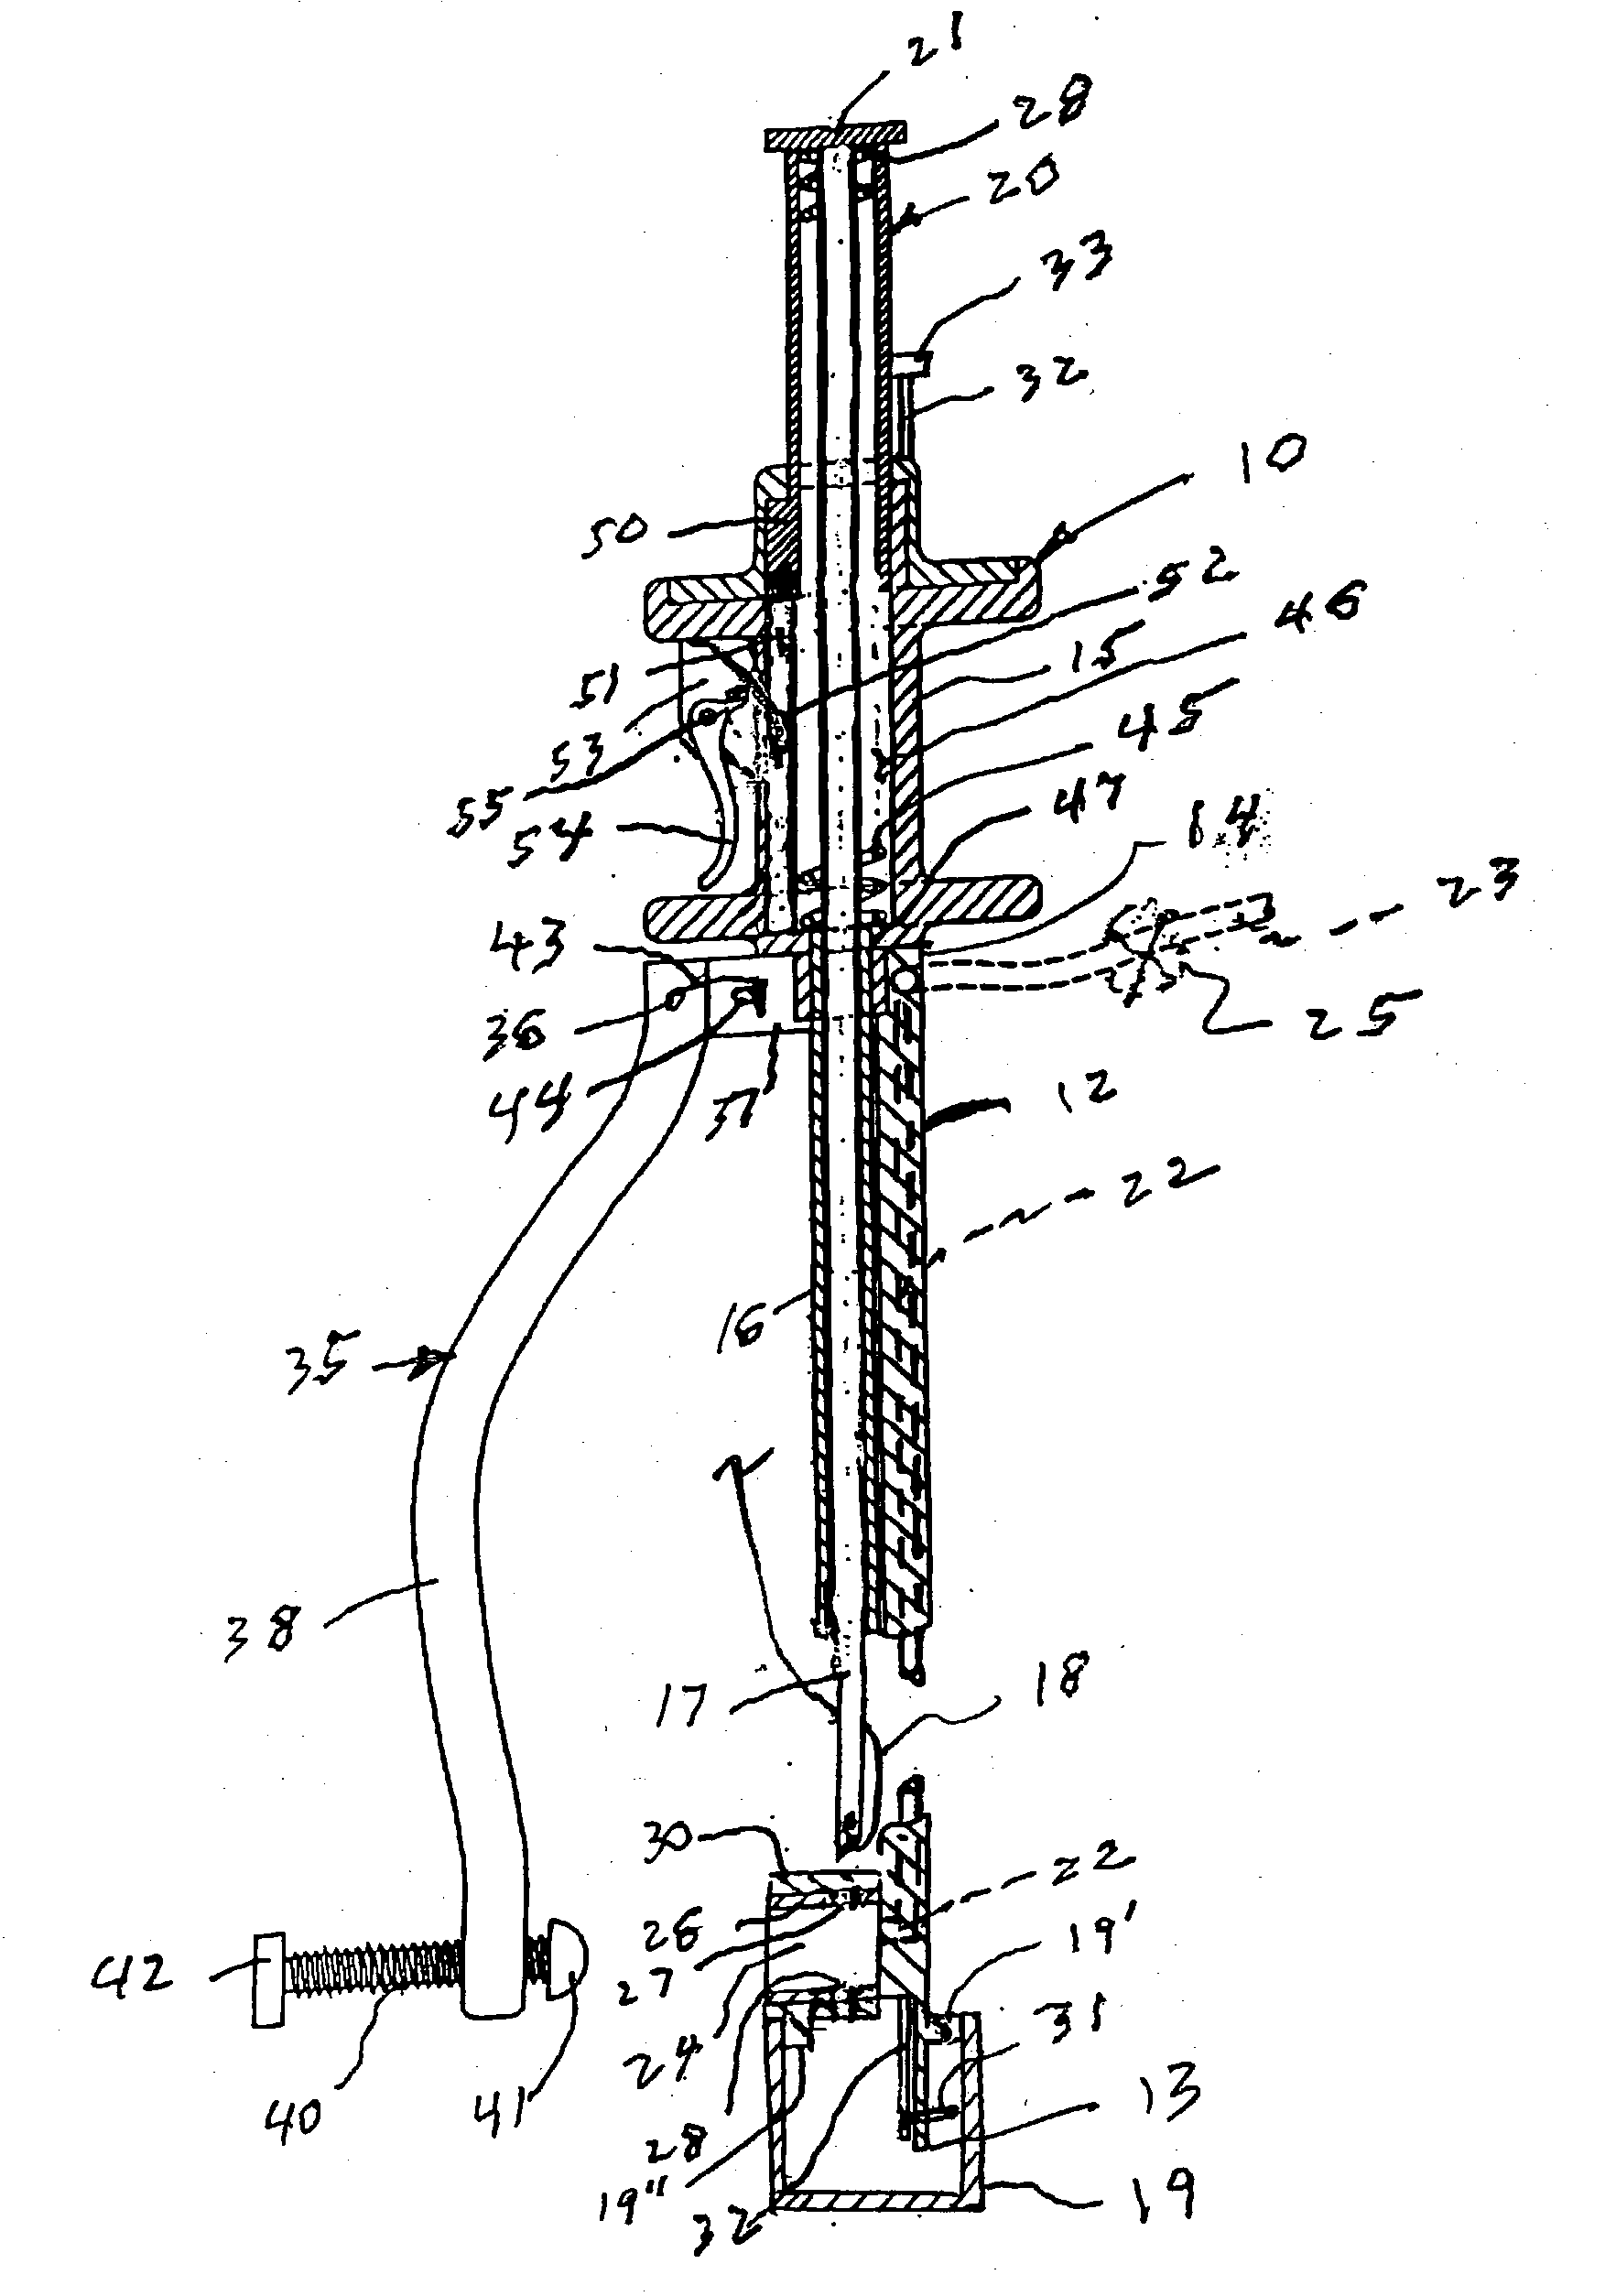 Surgical instrument for endoscopic suturing of deep subcutaneous tissue